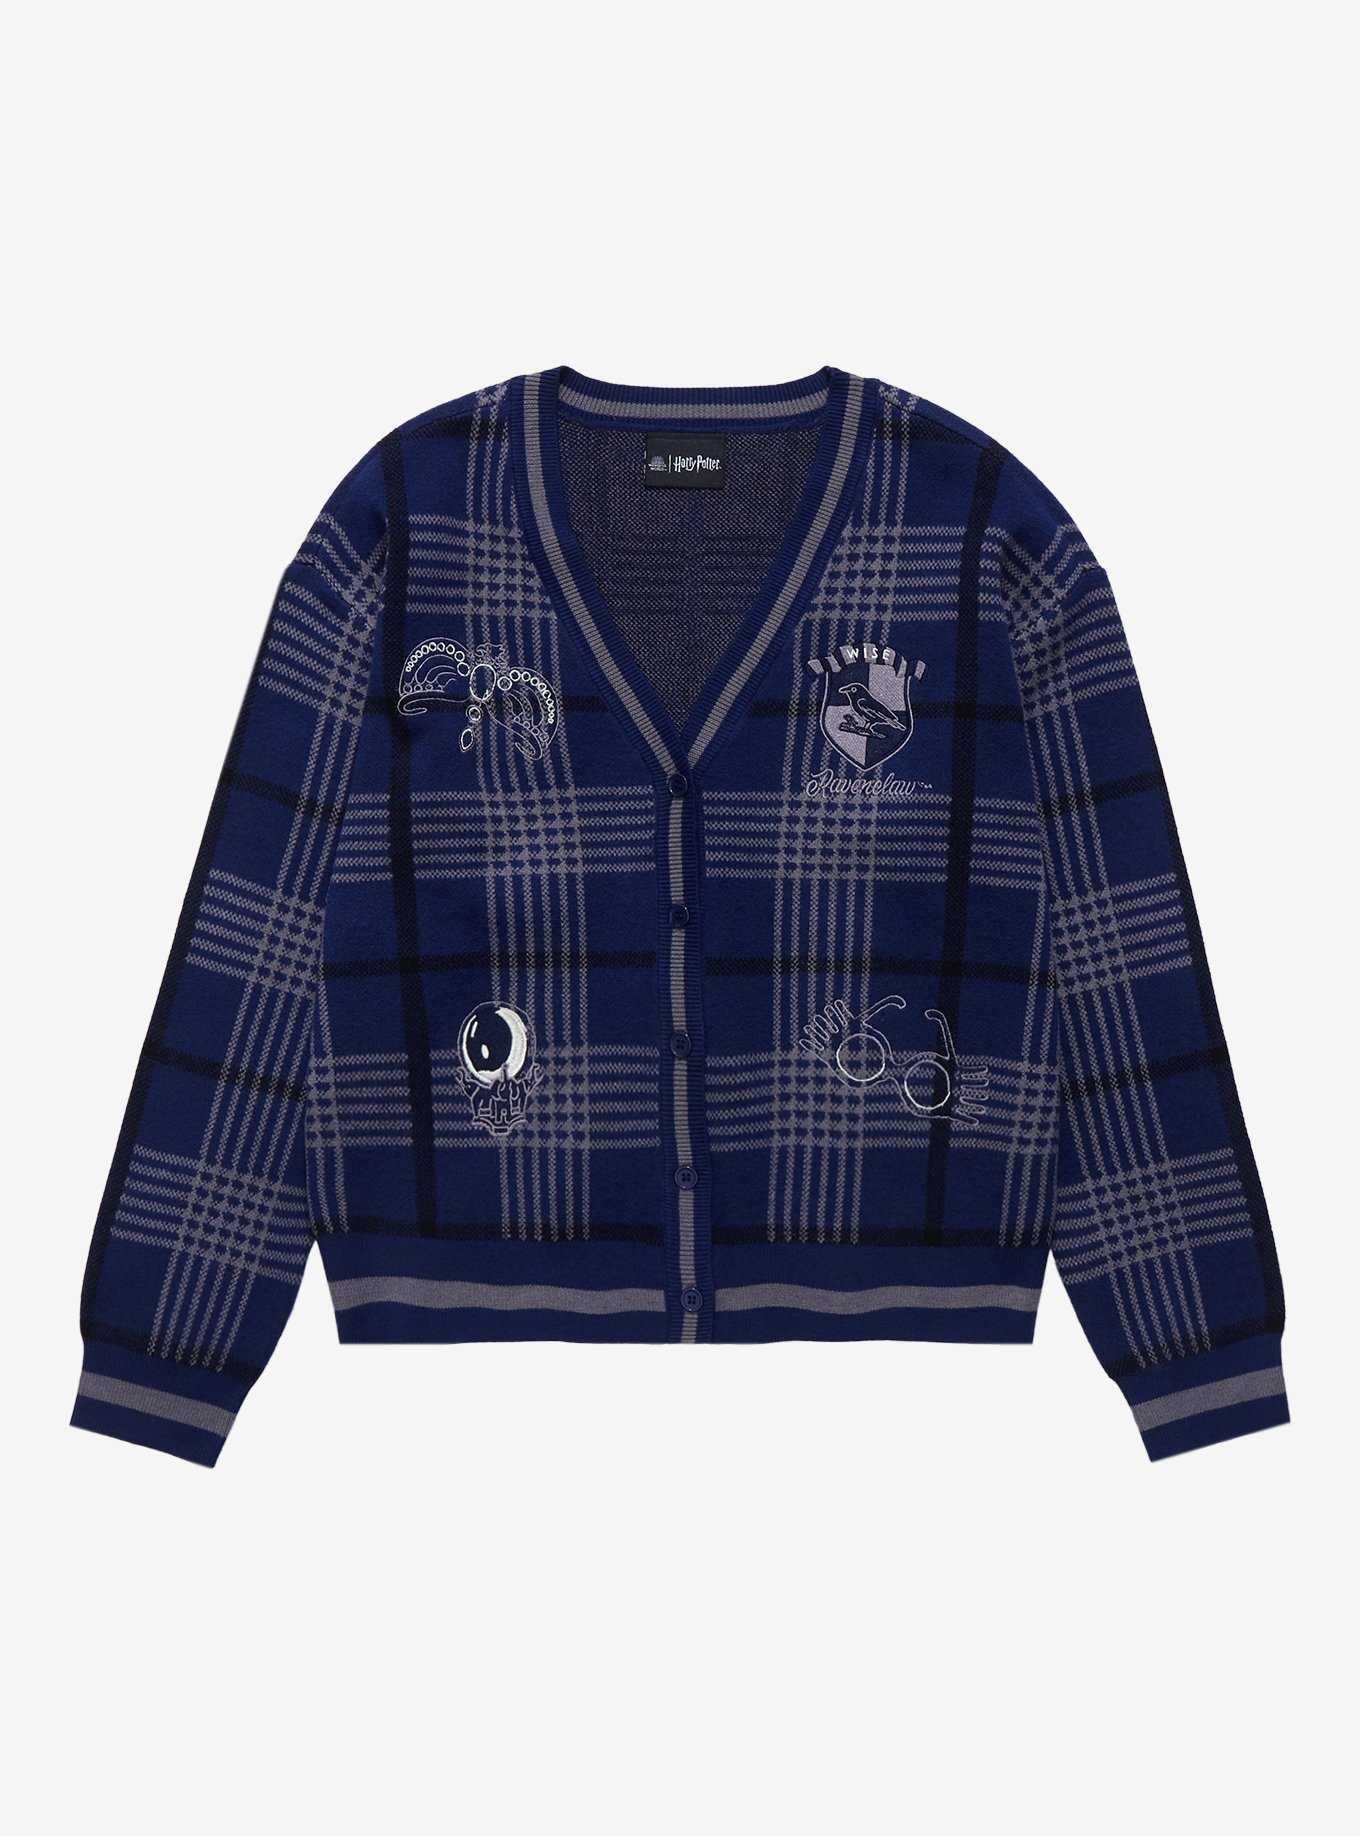 Harry Potter Ravenclaw Women's Cardigan - BoxLunch Exclusive, , hi-res